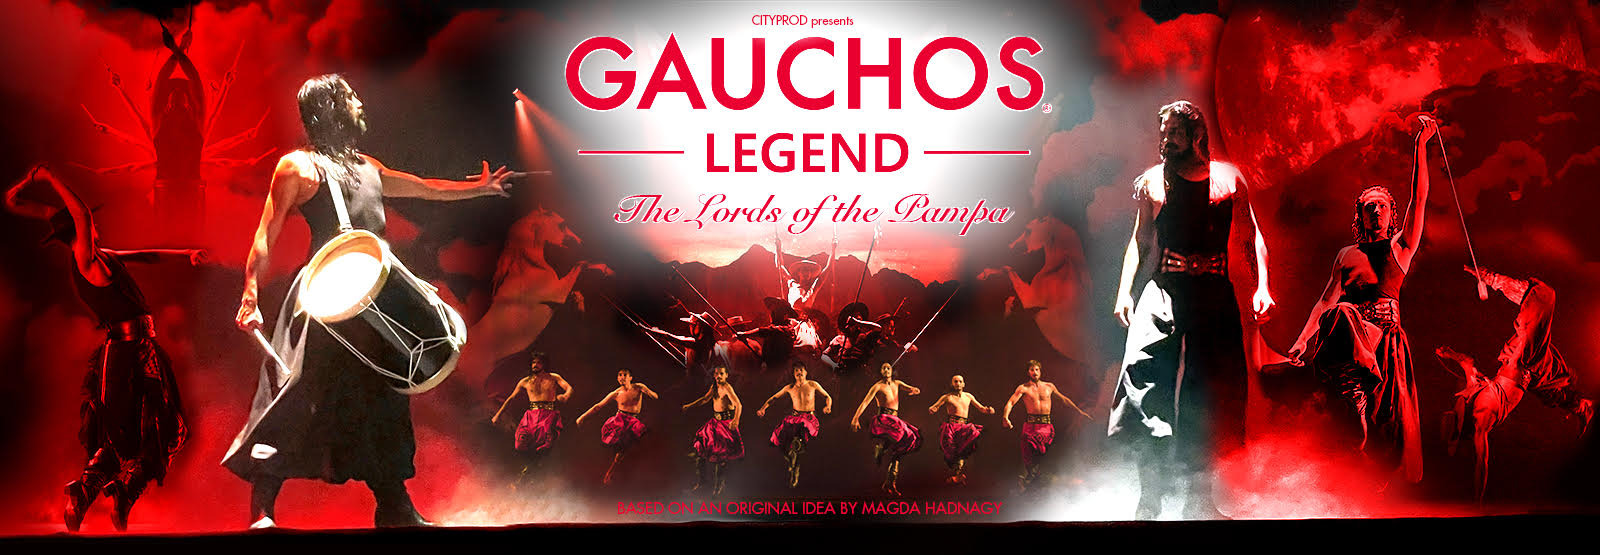 GAUCHOS LEGEND - The Lords of the Pampa